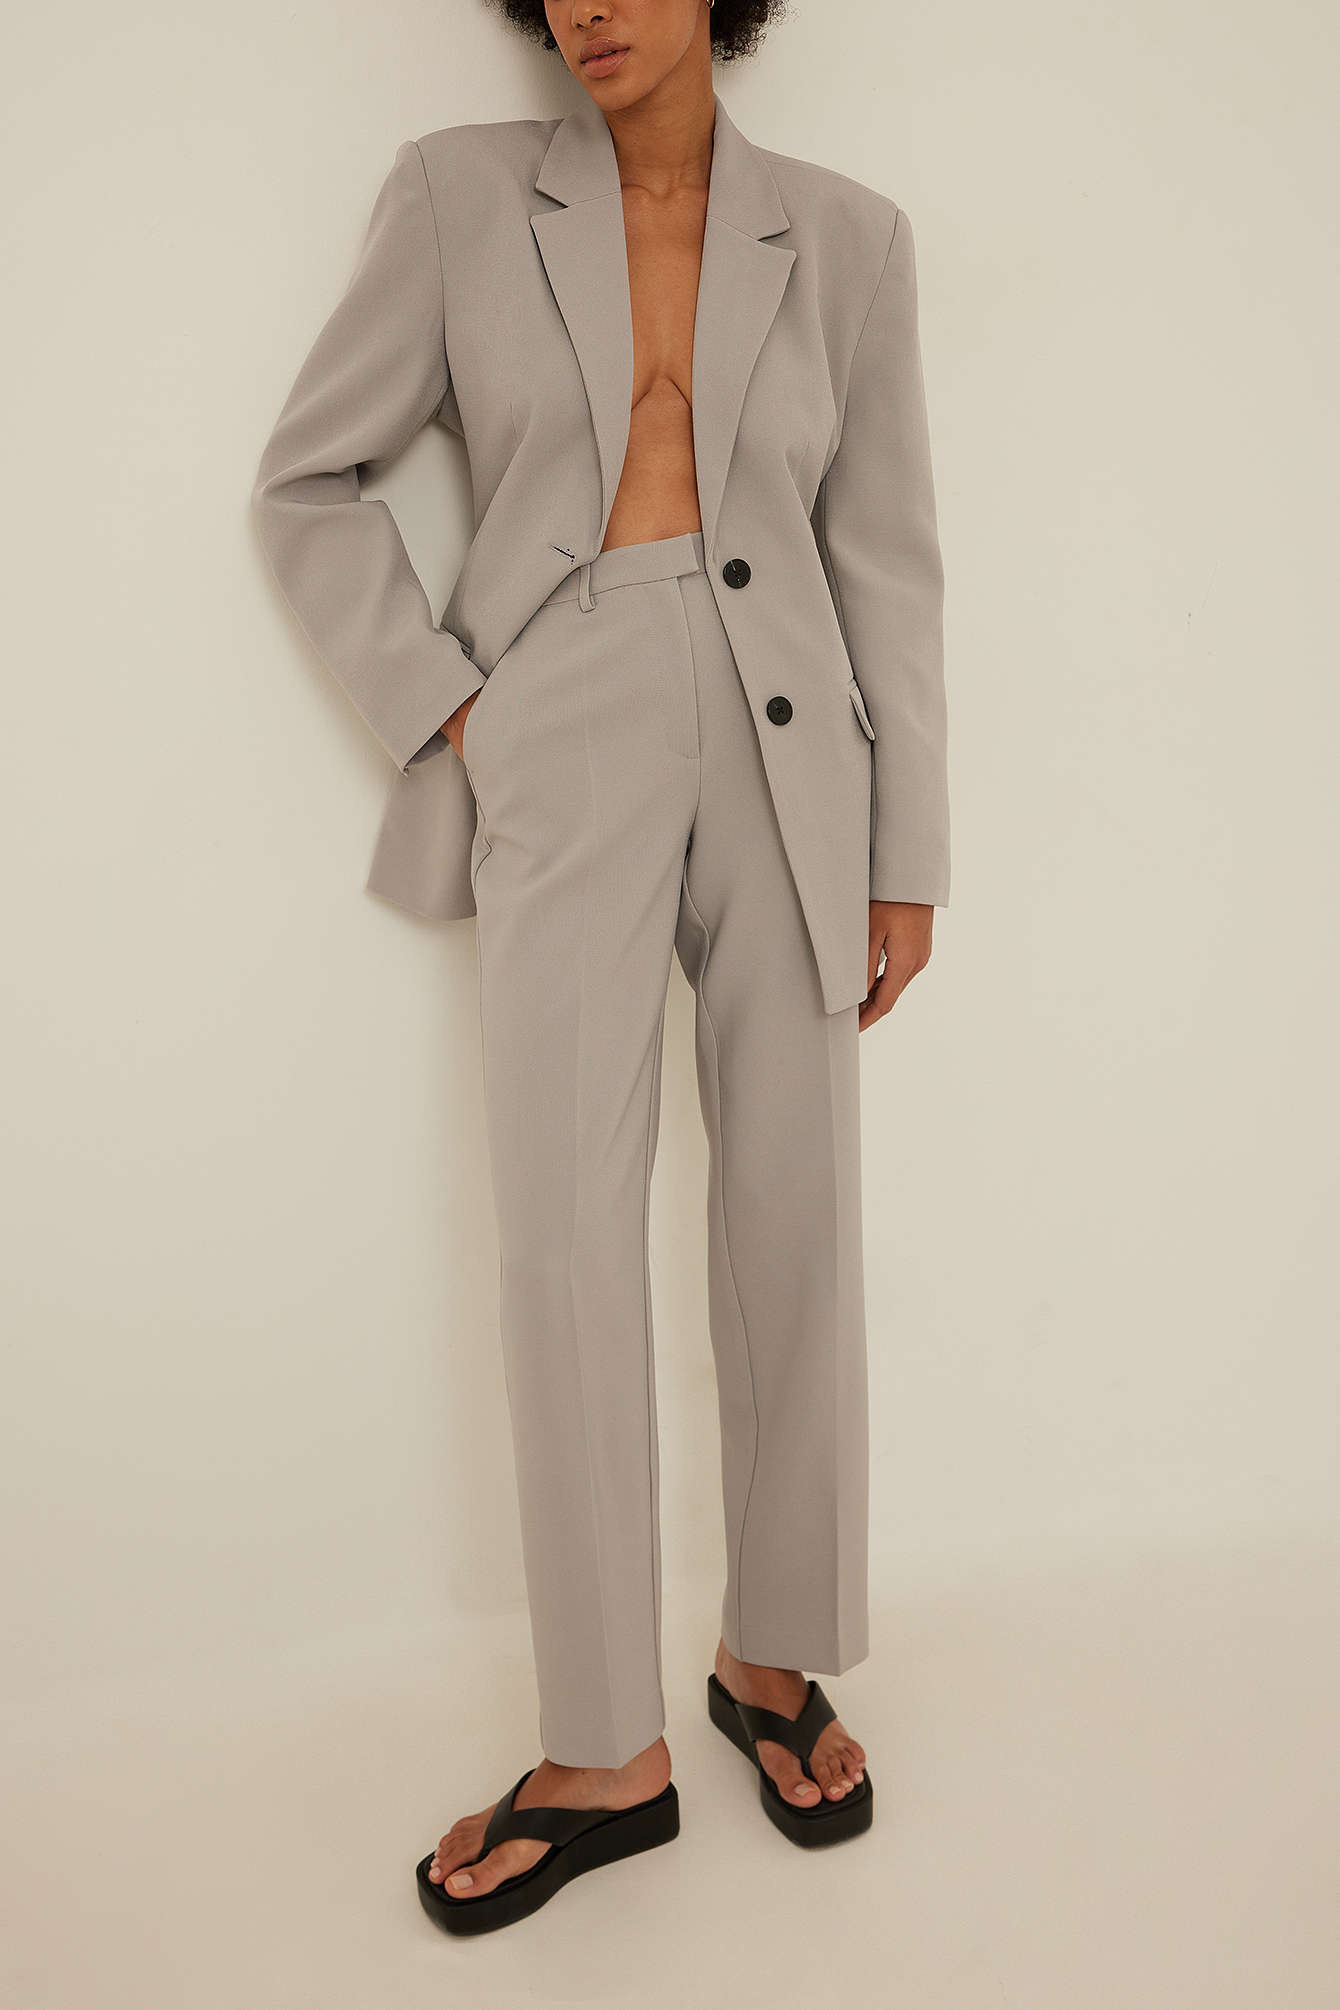 Tall Men's Mid Grey Suit Trousers | American Tall | Pants for tall men,  Tall guys, Fitted dress pants